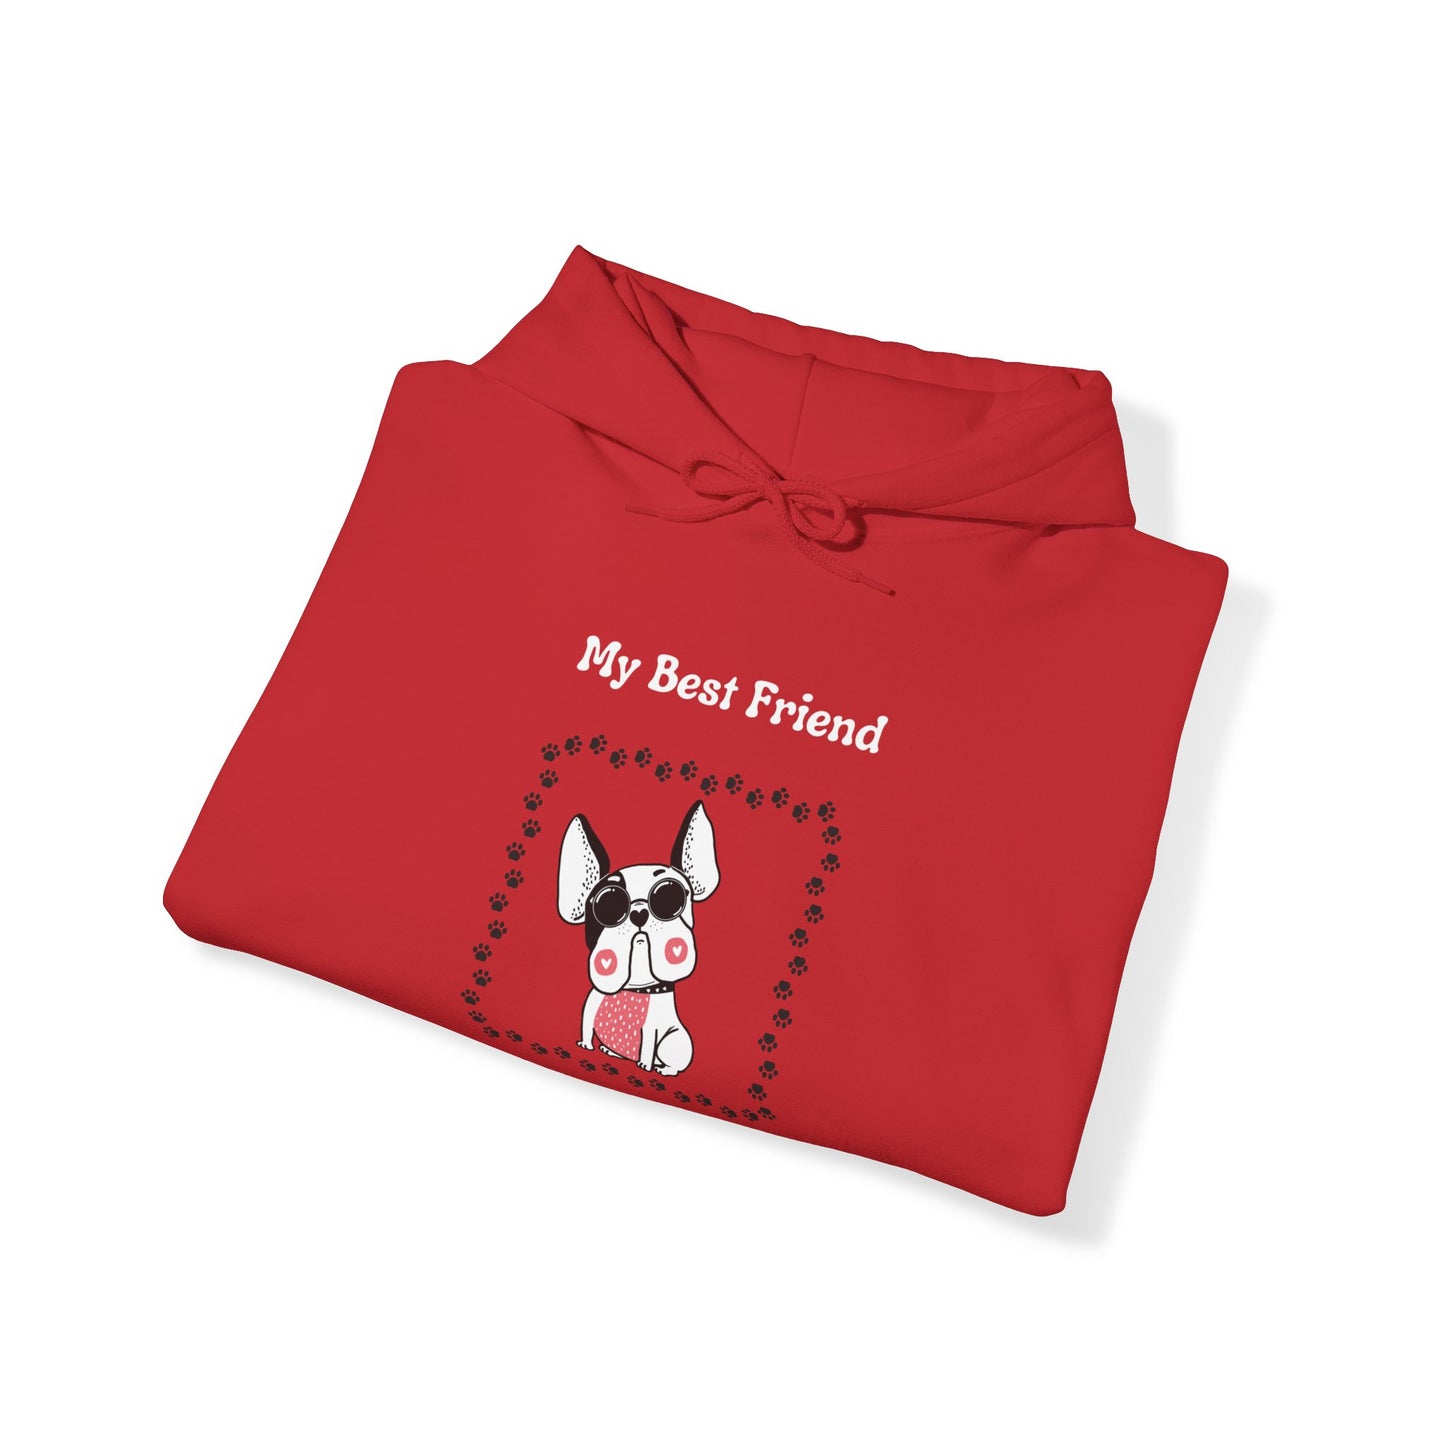 Frenchie The Bull dog. My Best Friend Has Paws. Unisex Hooded Sweatshirt.